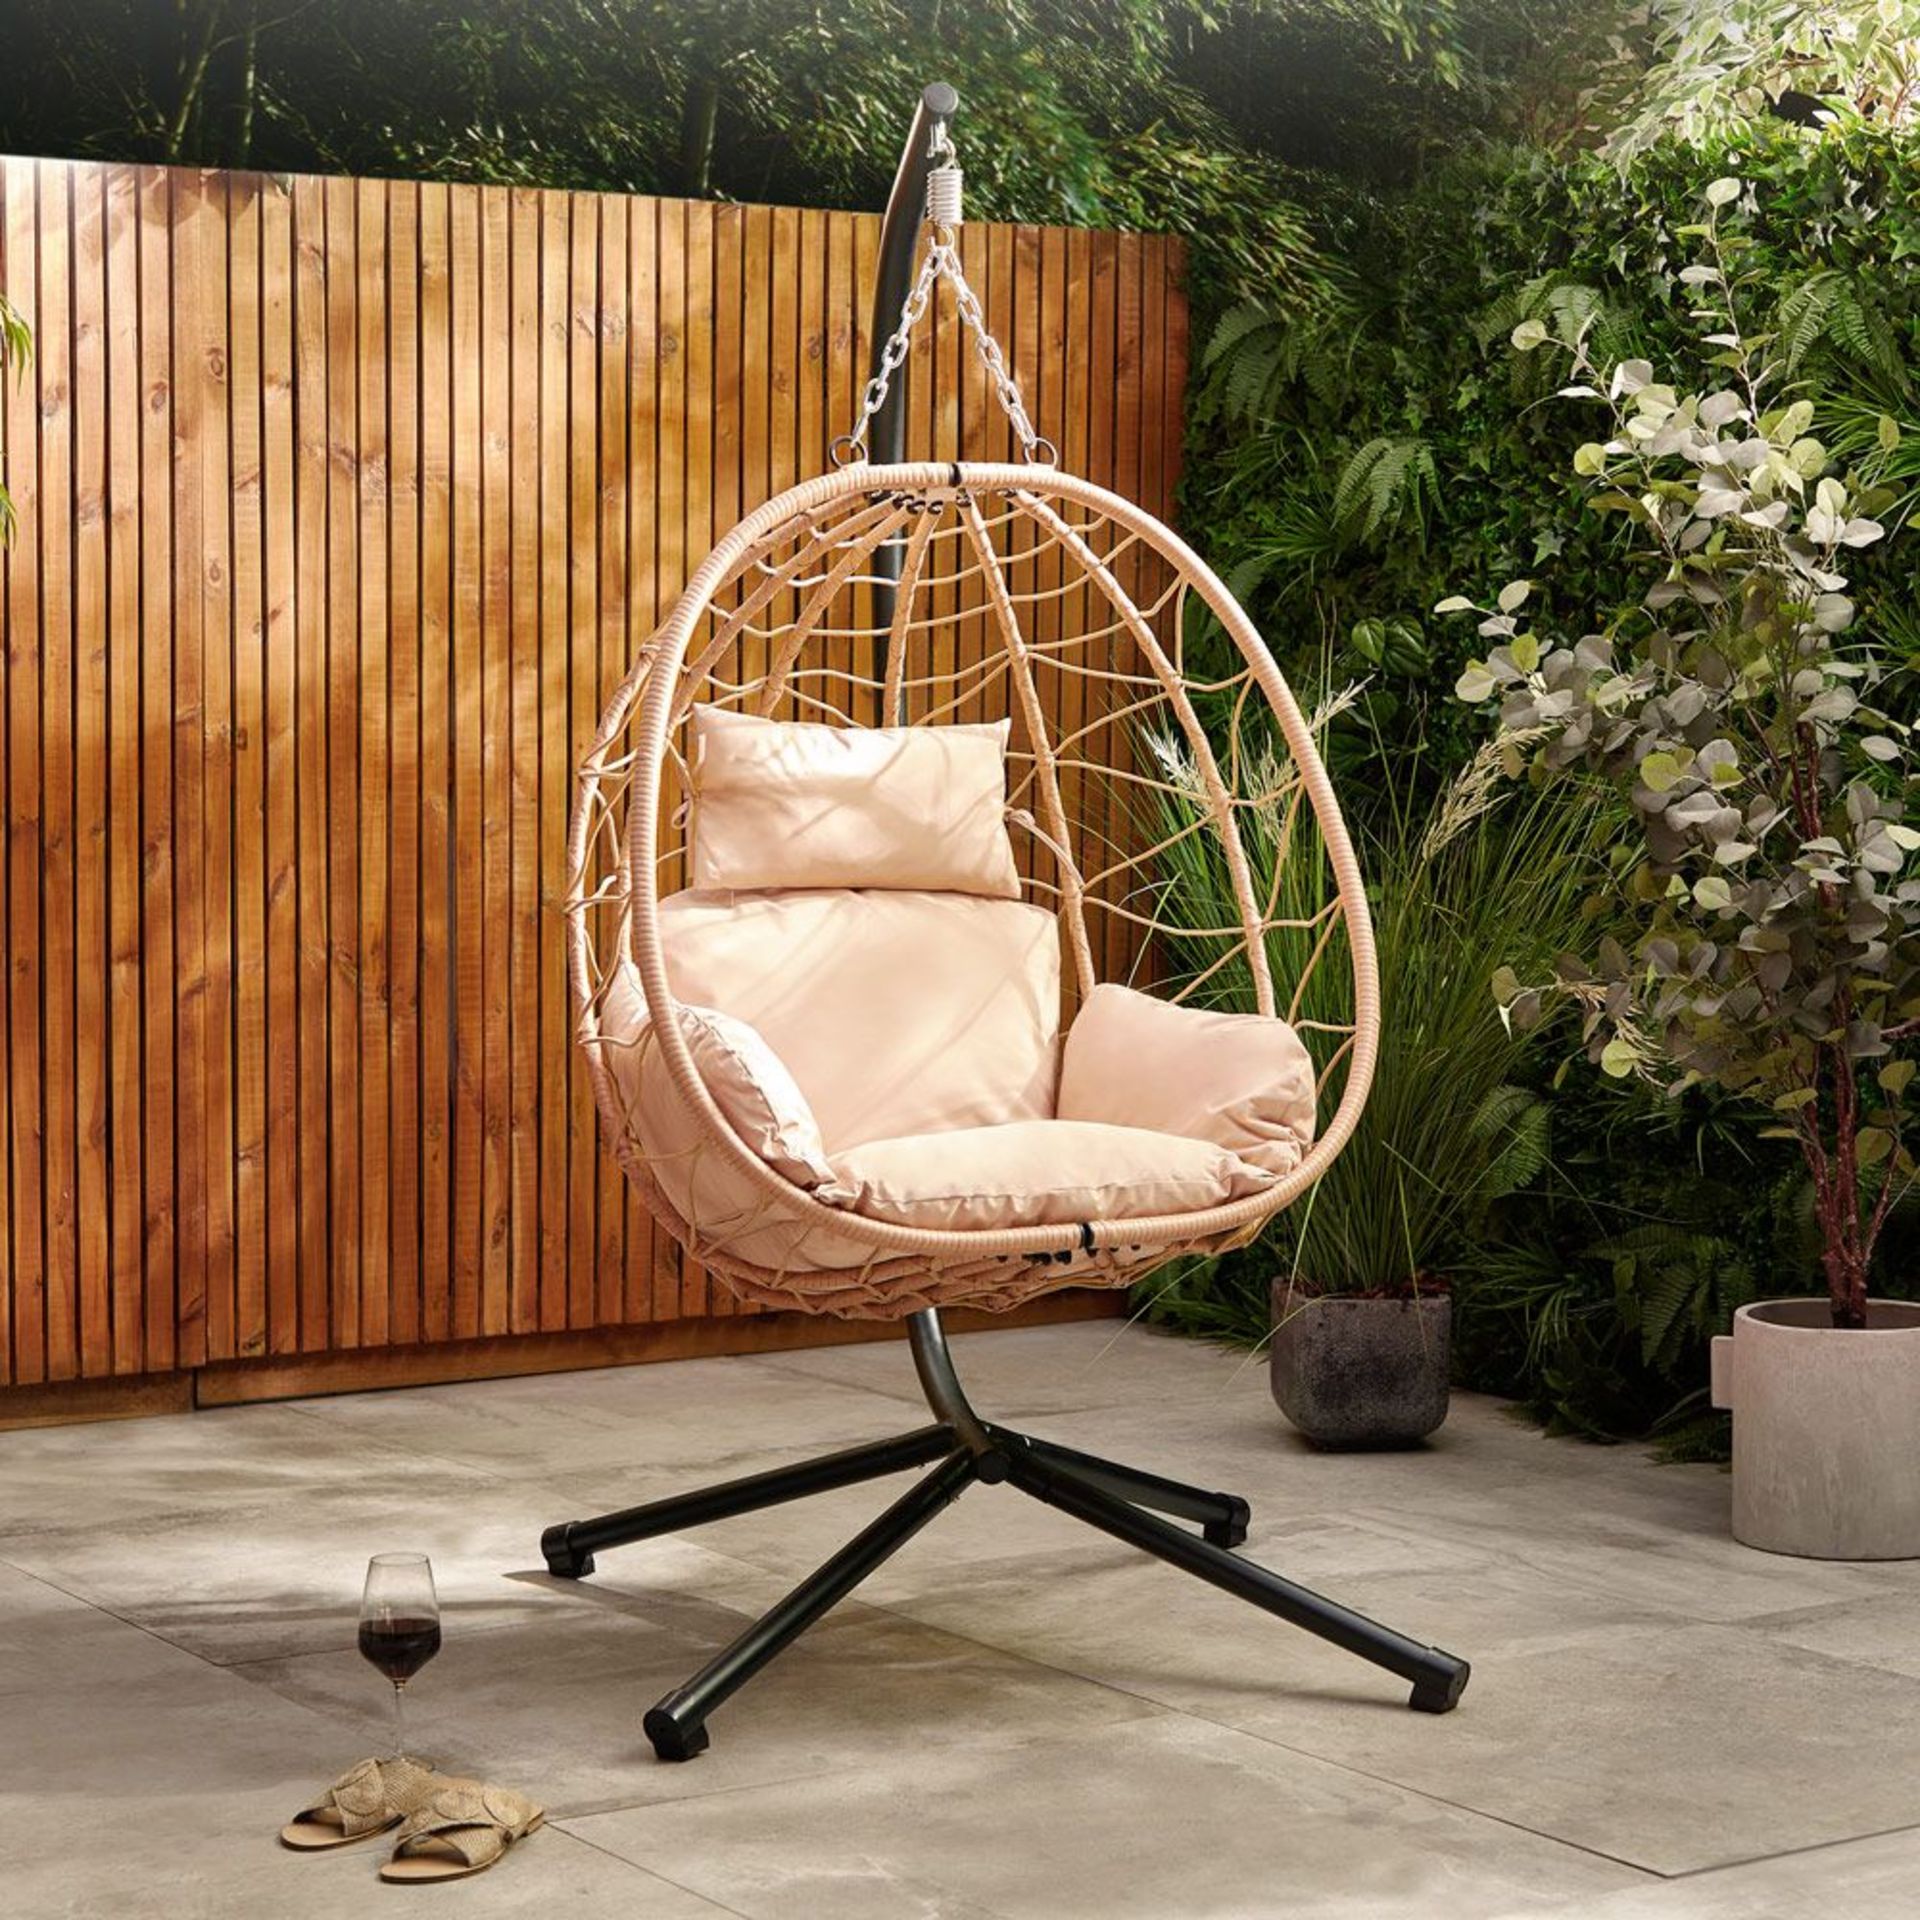 Natural Rattan Hanging Egg Chair. - BI. Use our Natural Rattan Hanging Egg Chair to add a touch of